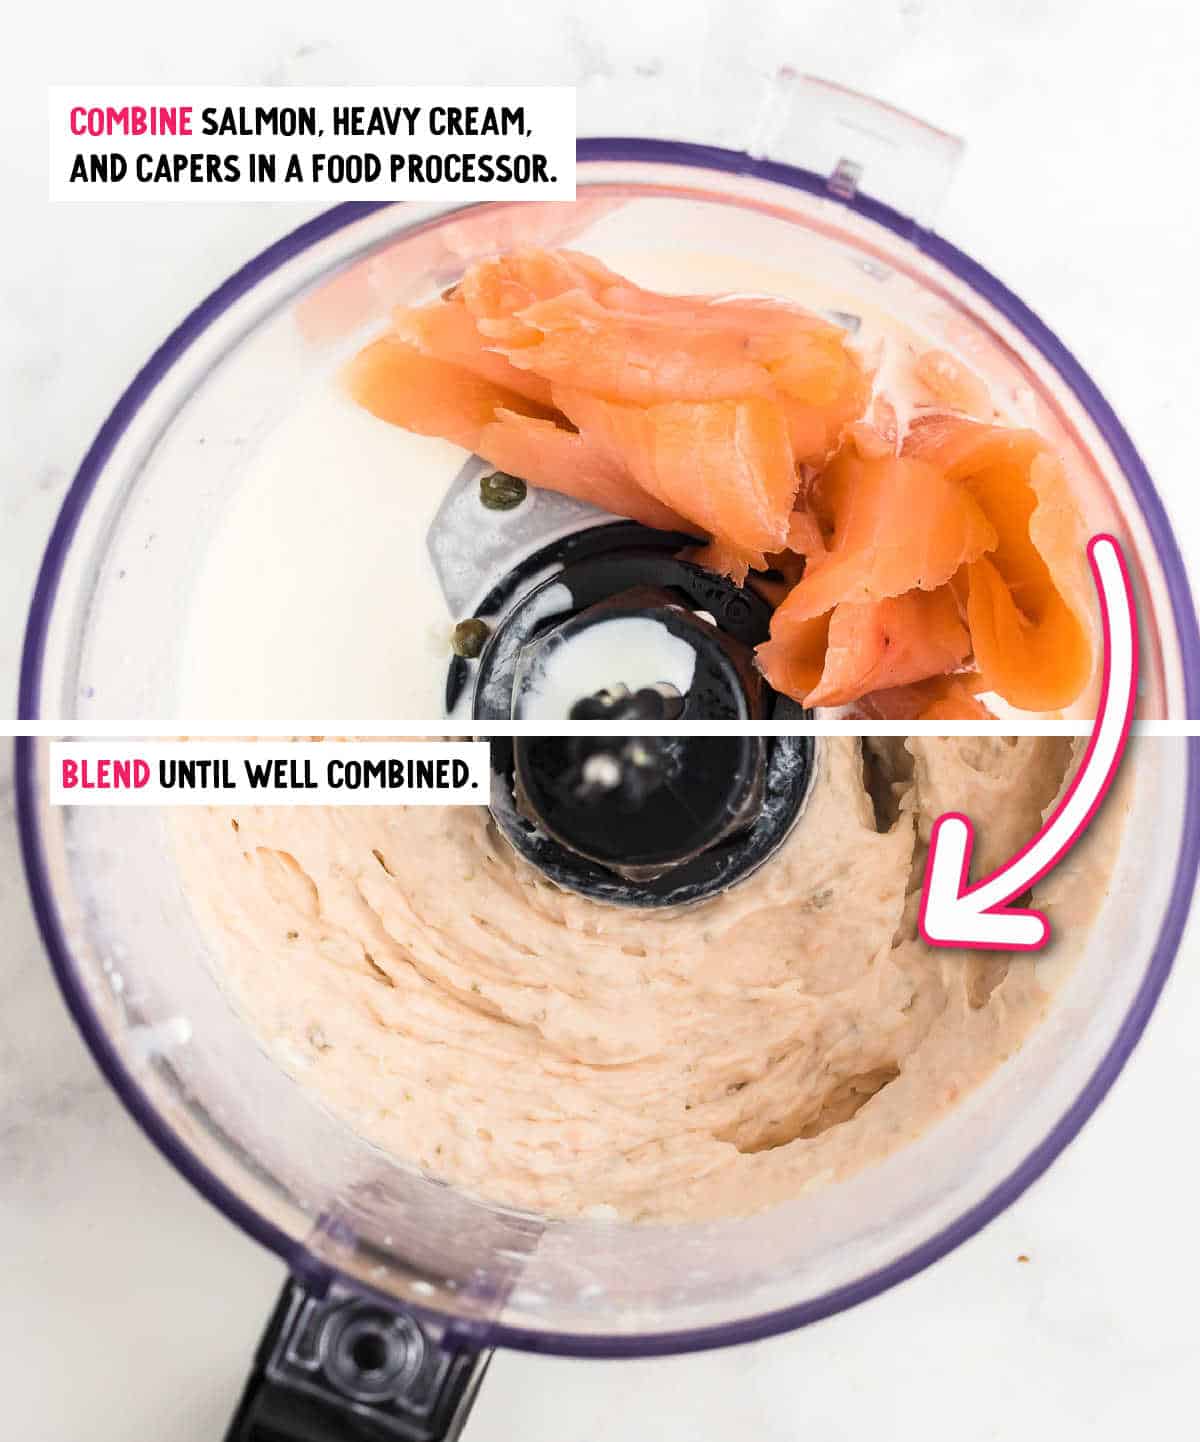 blending the ingredients in a food processor